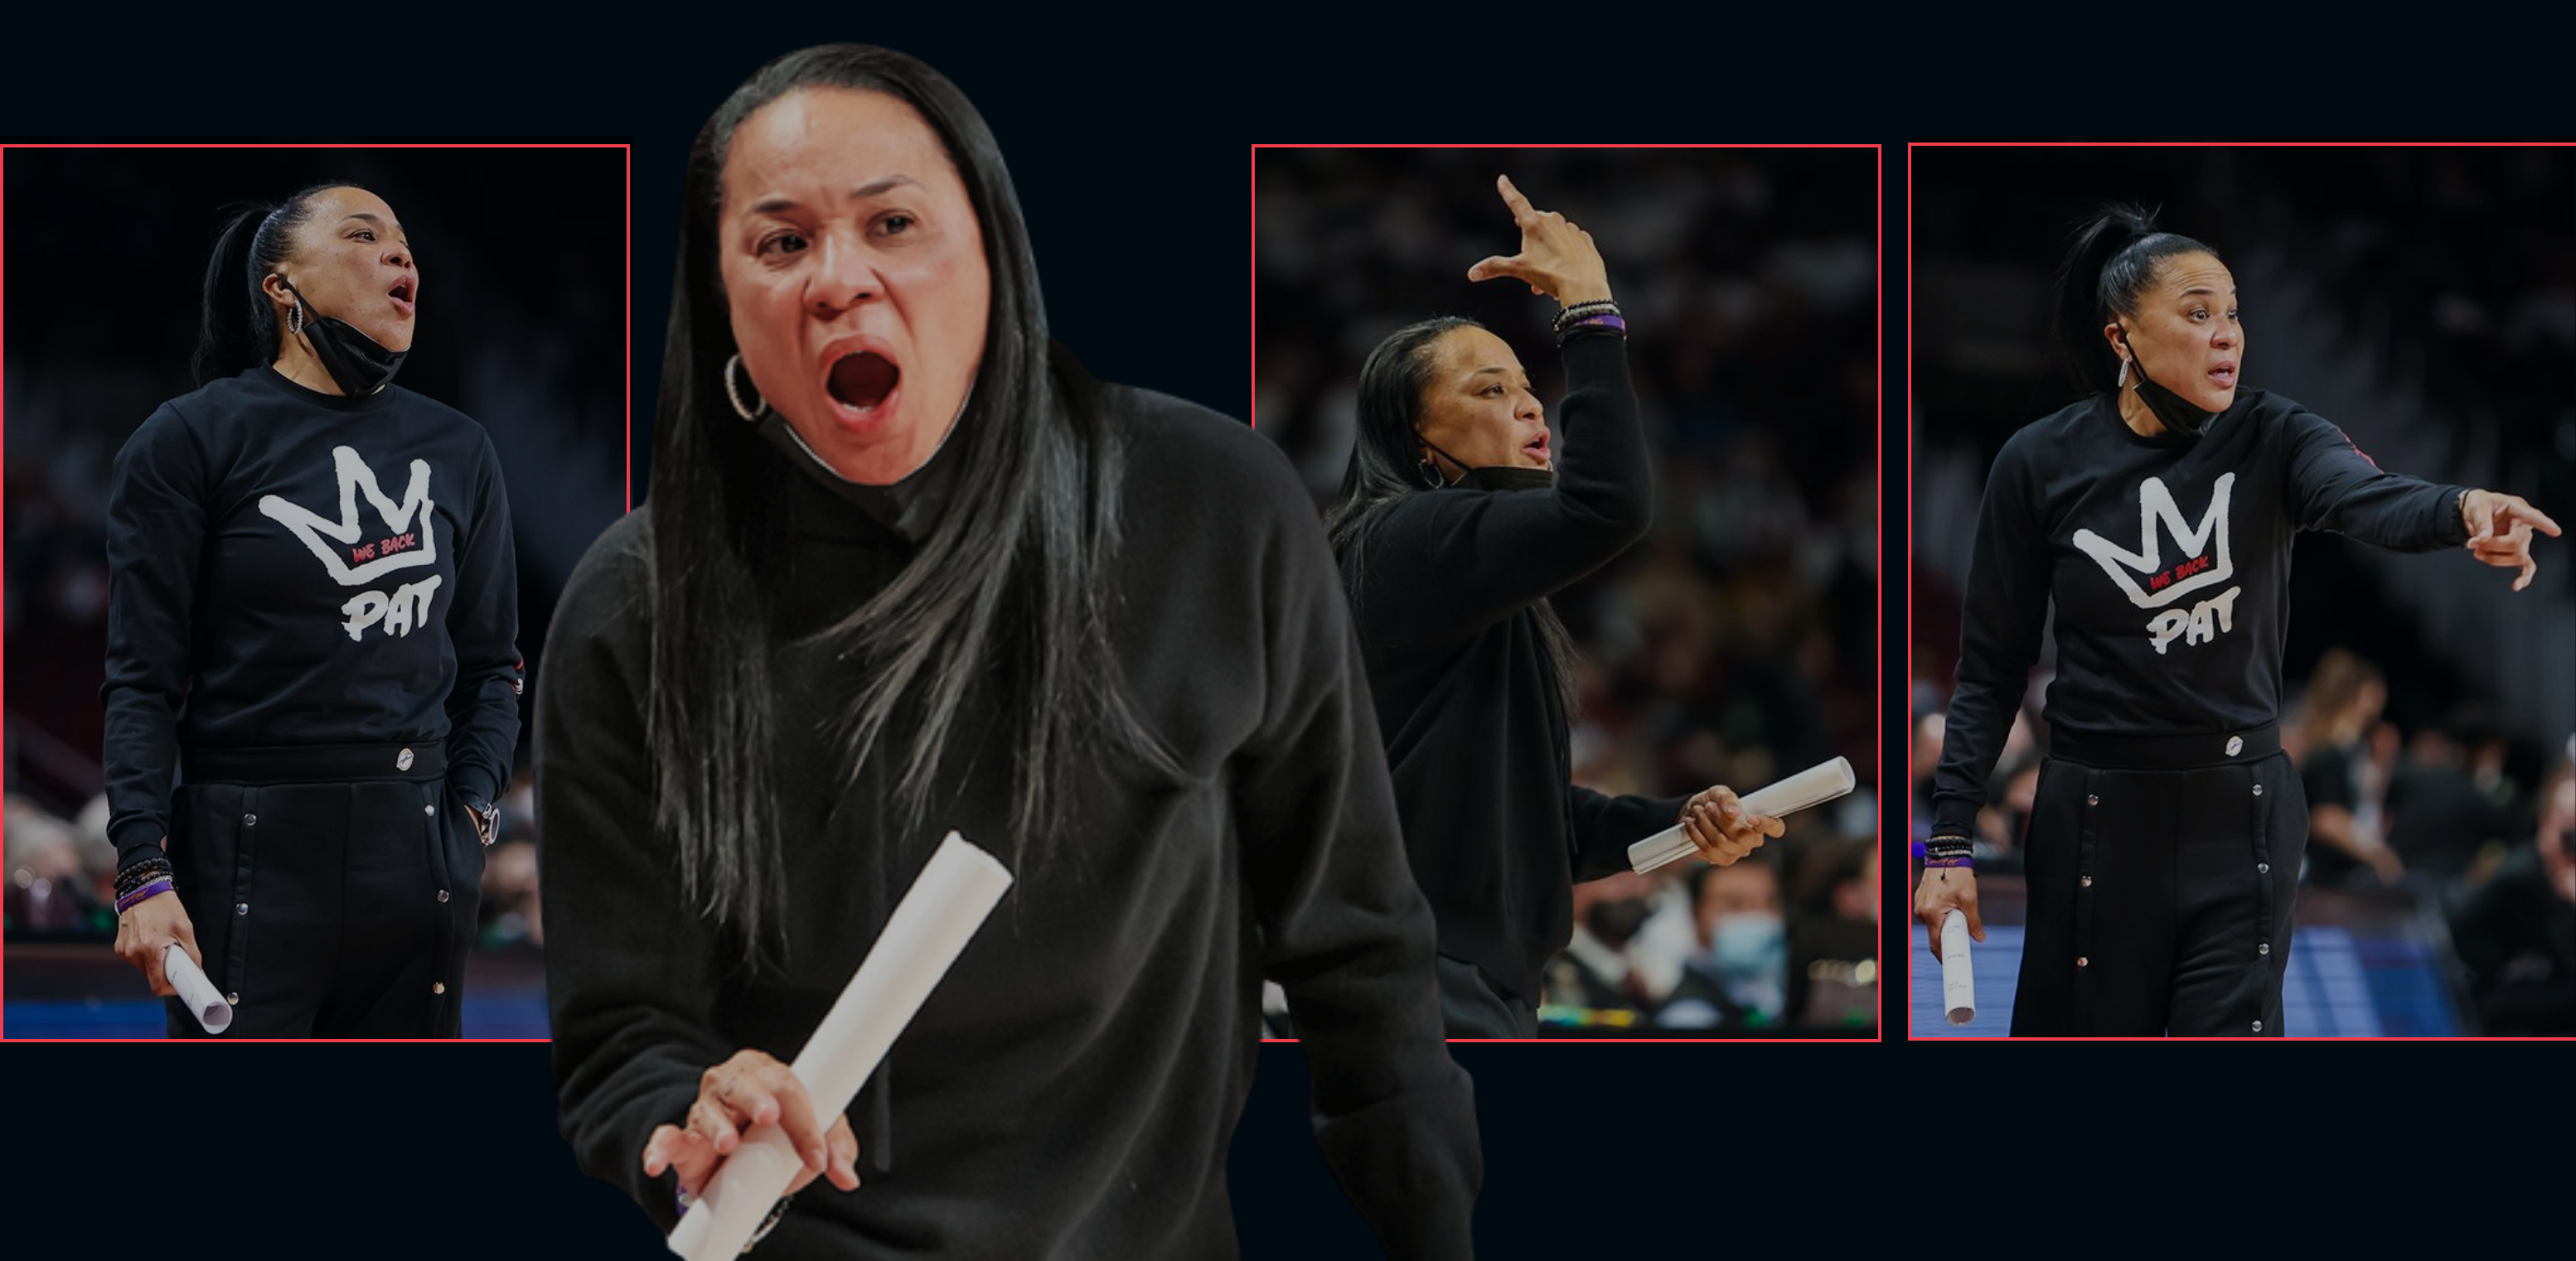 Anatomy of a $21.1 million deal: Breaking down the salary details of a top women's college basketball coach thumbnail